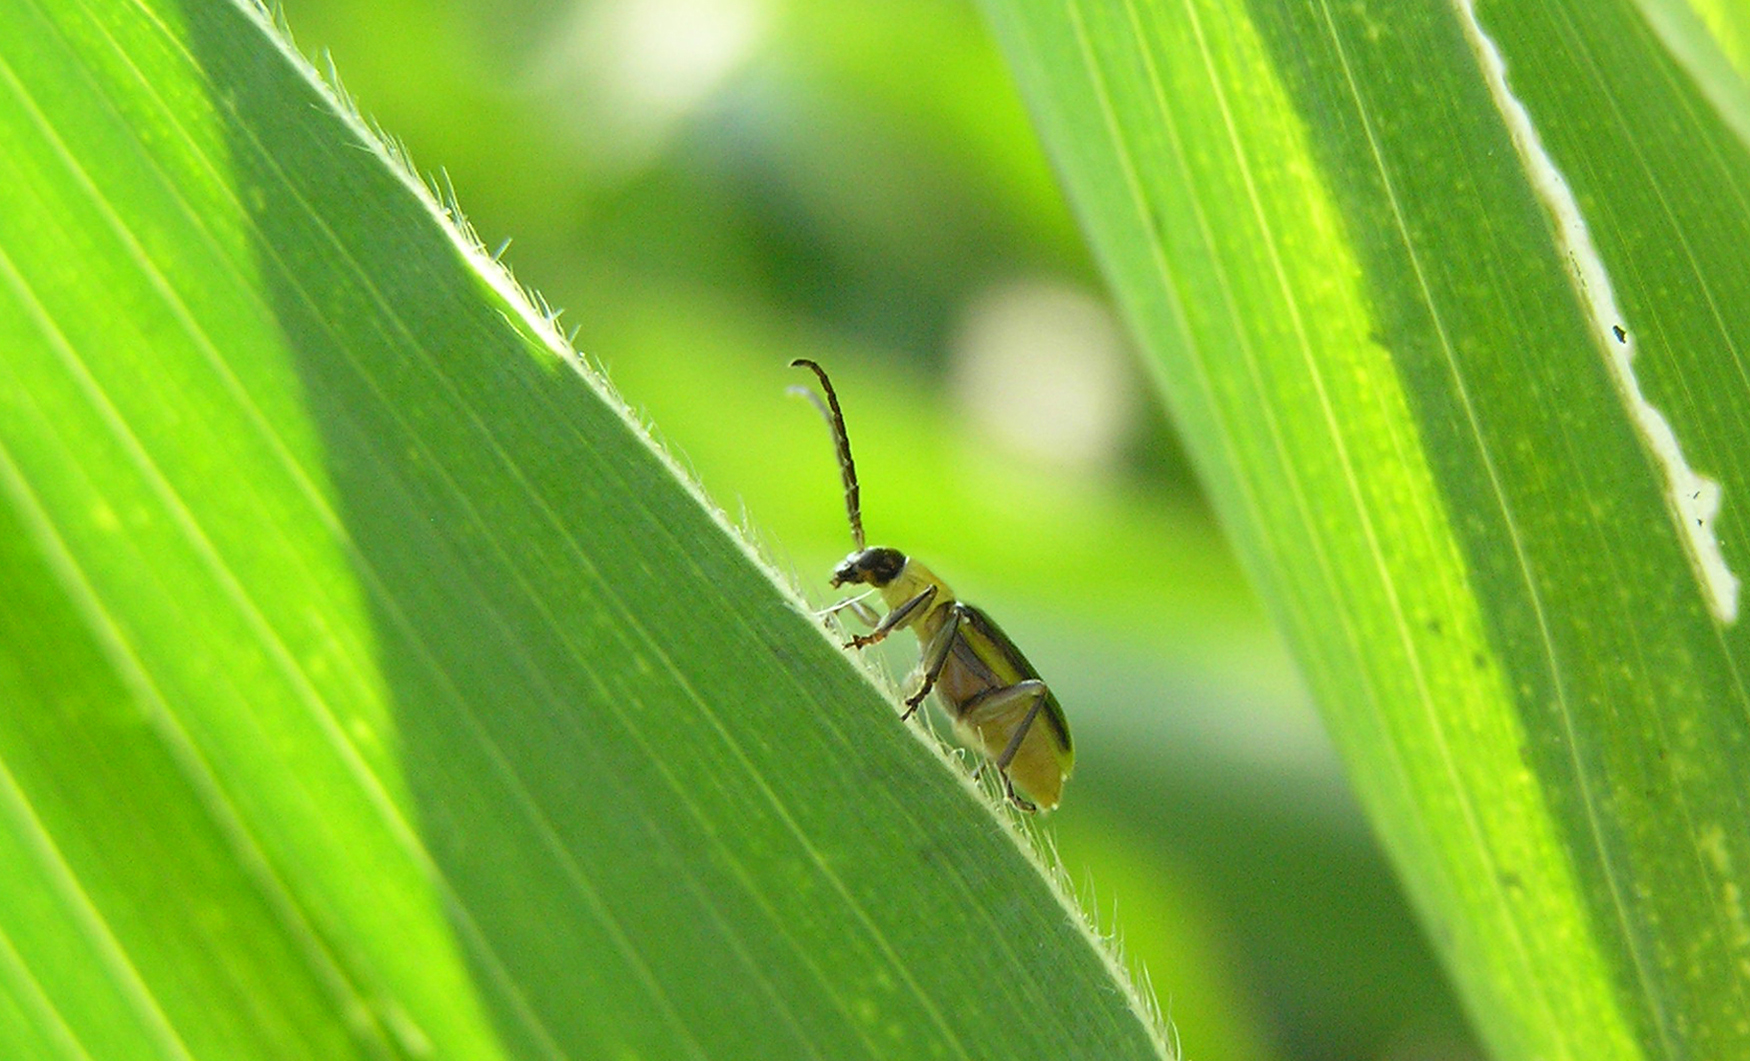 An adult Western corn rootworm crawls on a corn leaf. Photo by Nick Lauter, USDA-ARS.